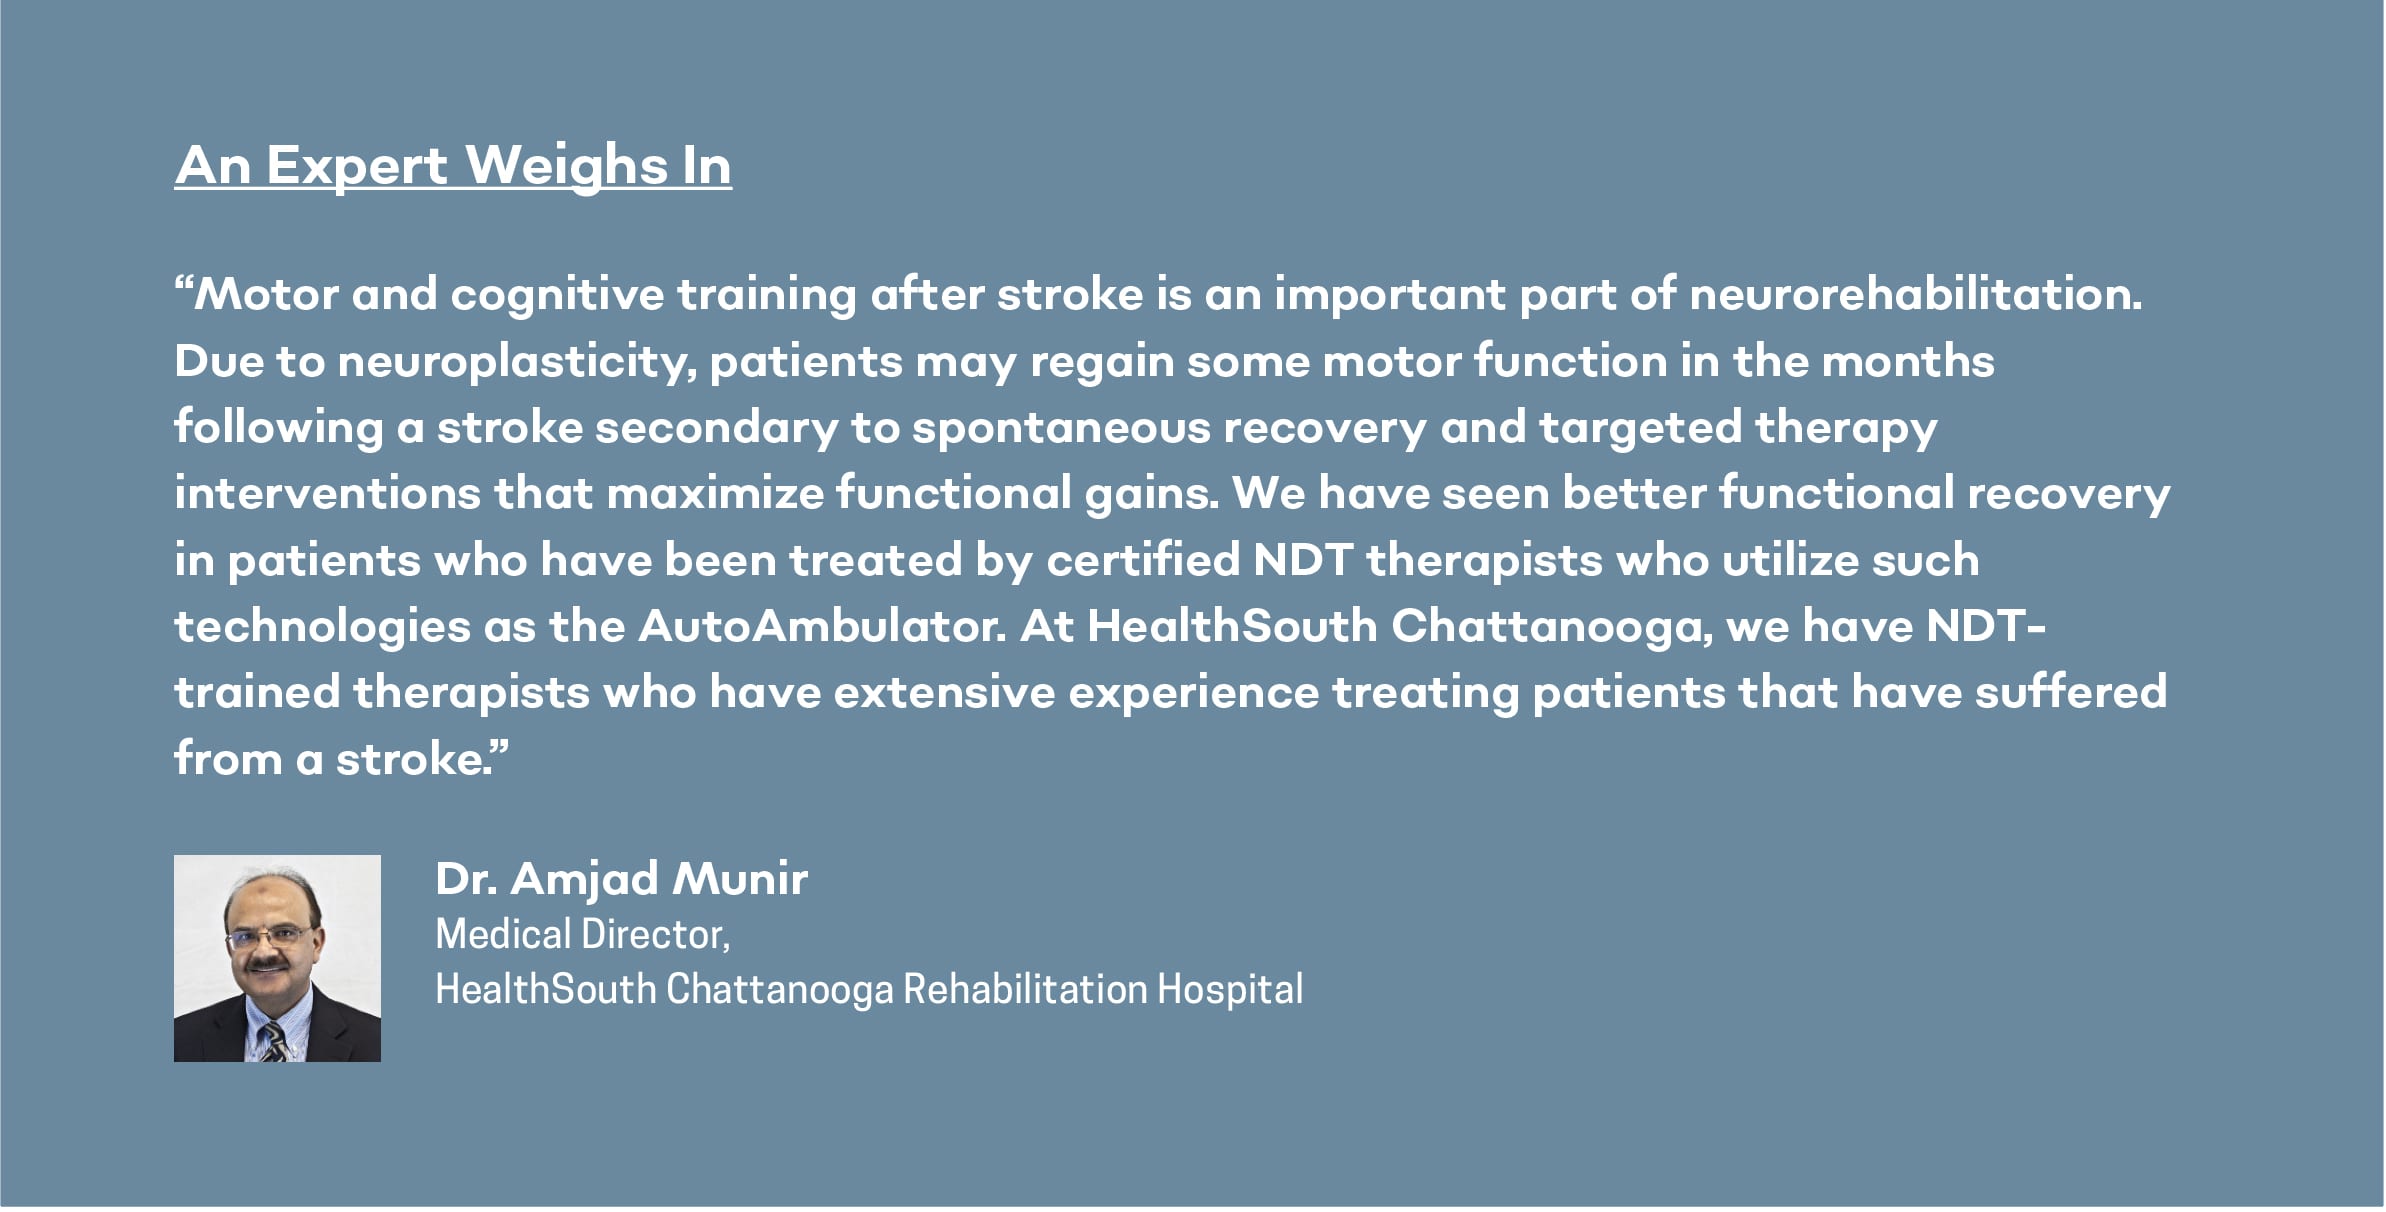 expert opinion on neurohabilitation for stroke recovery in chattanooga from Dr. Amjad Munir